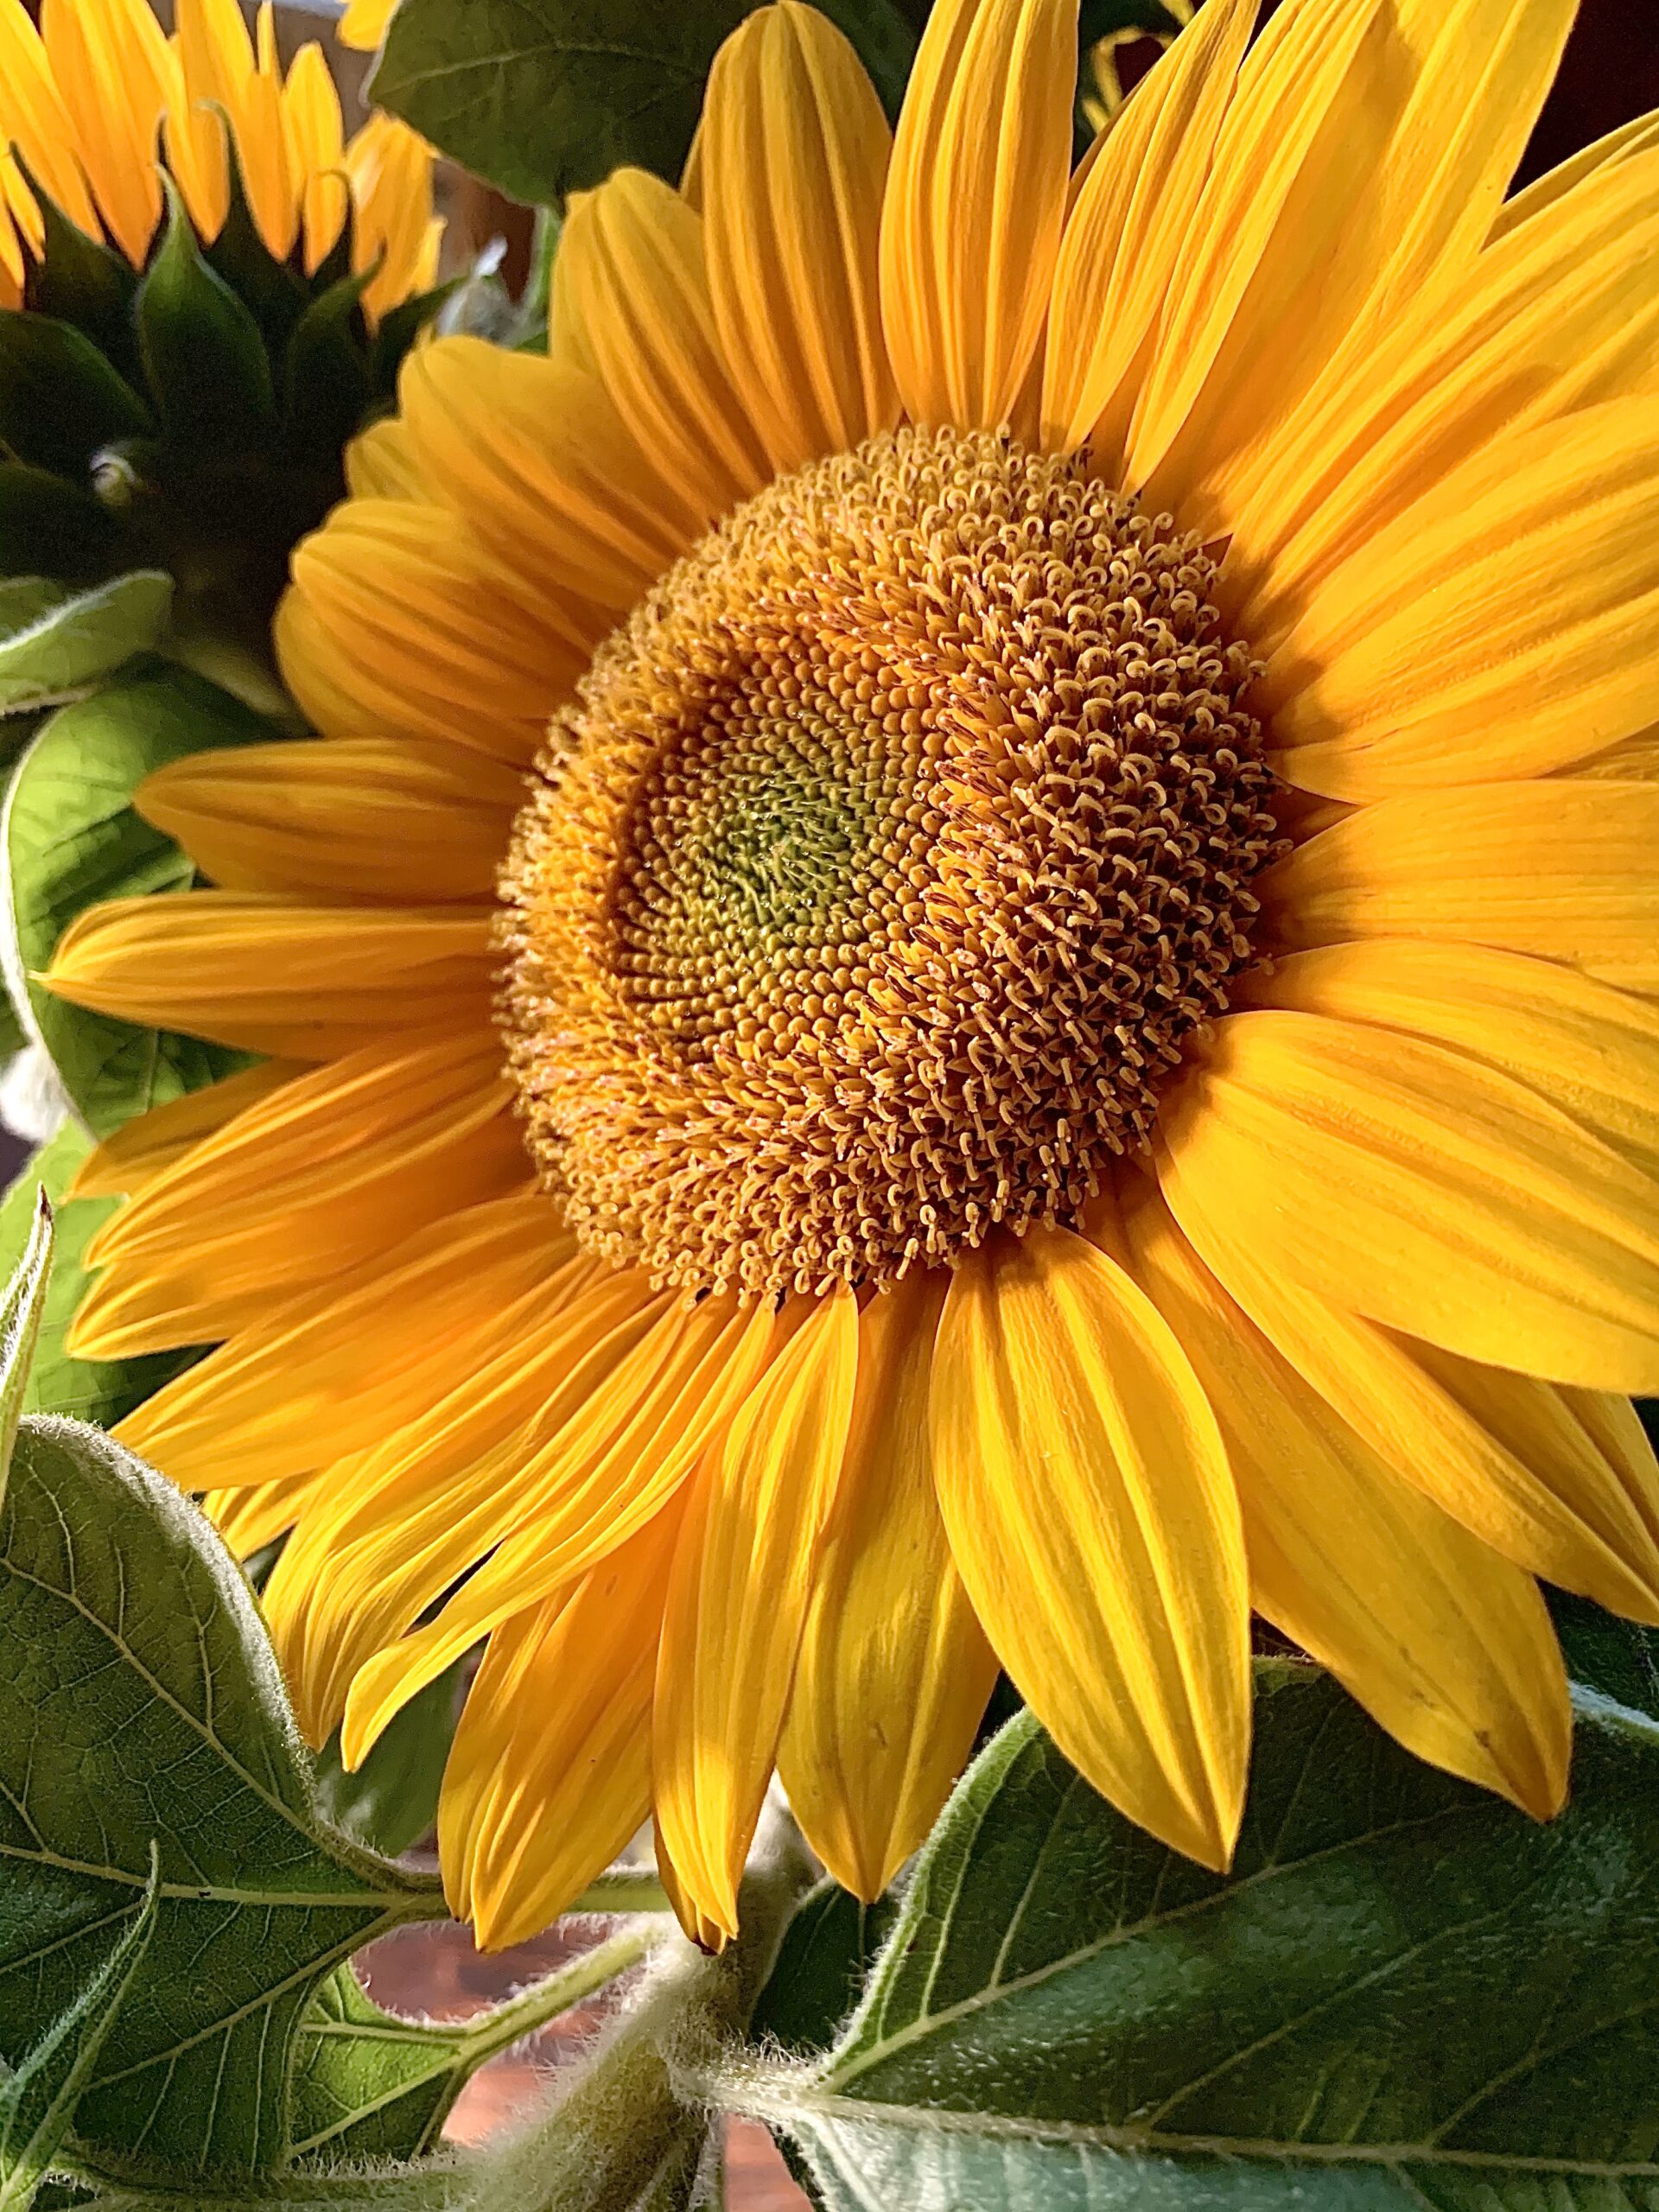 A sunflower in a vase with green leaves.